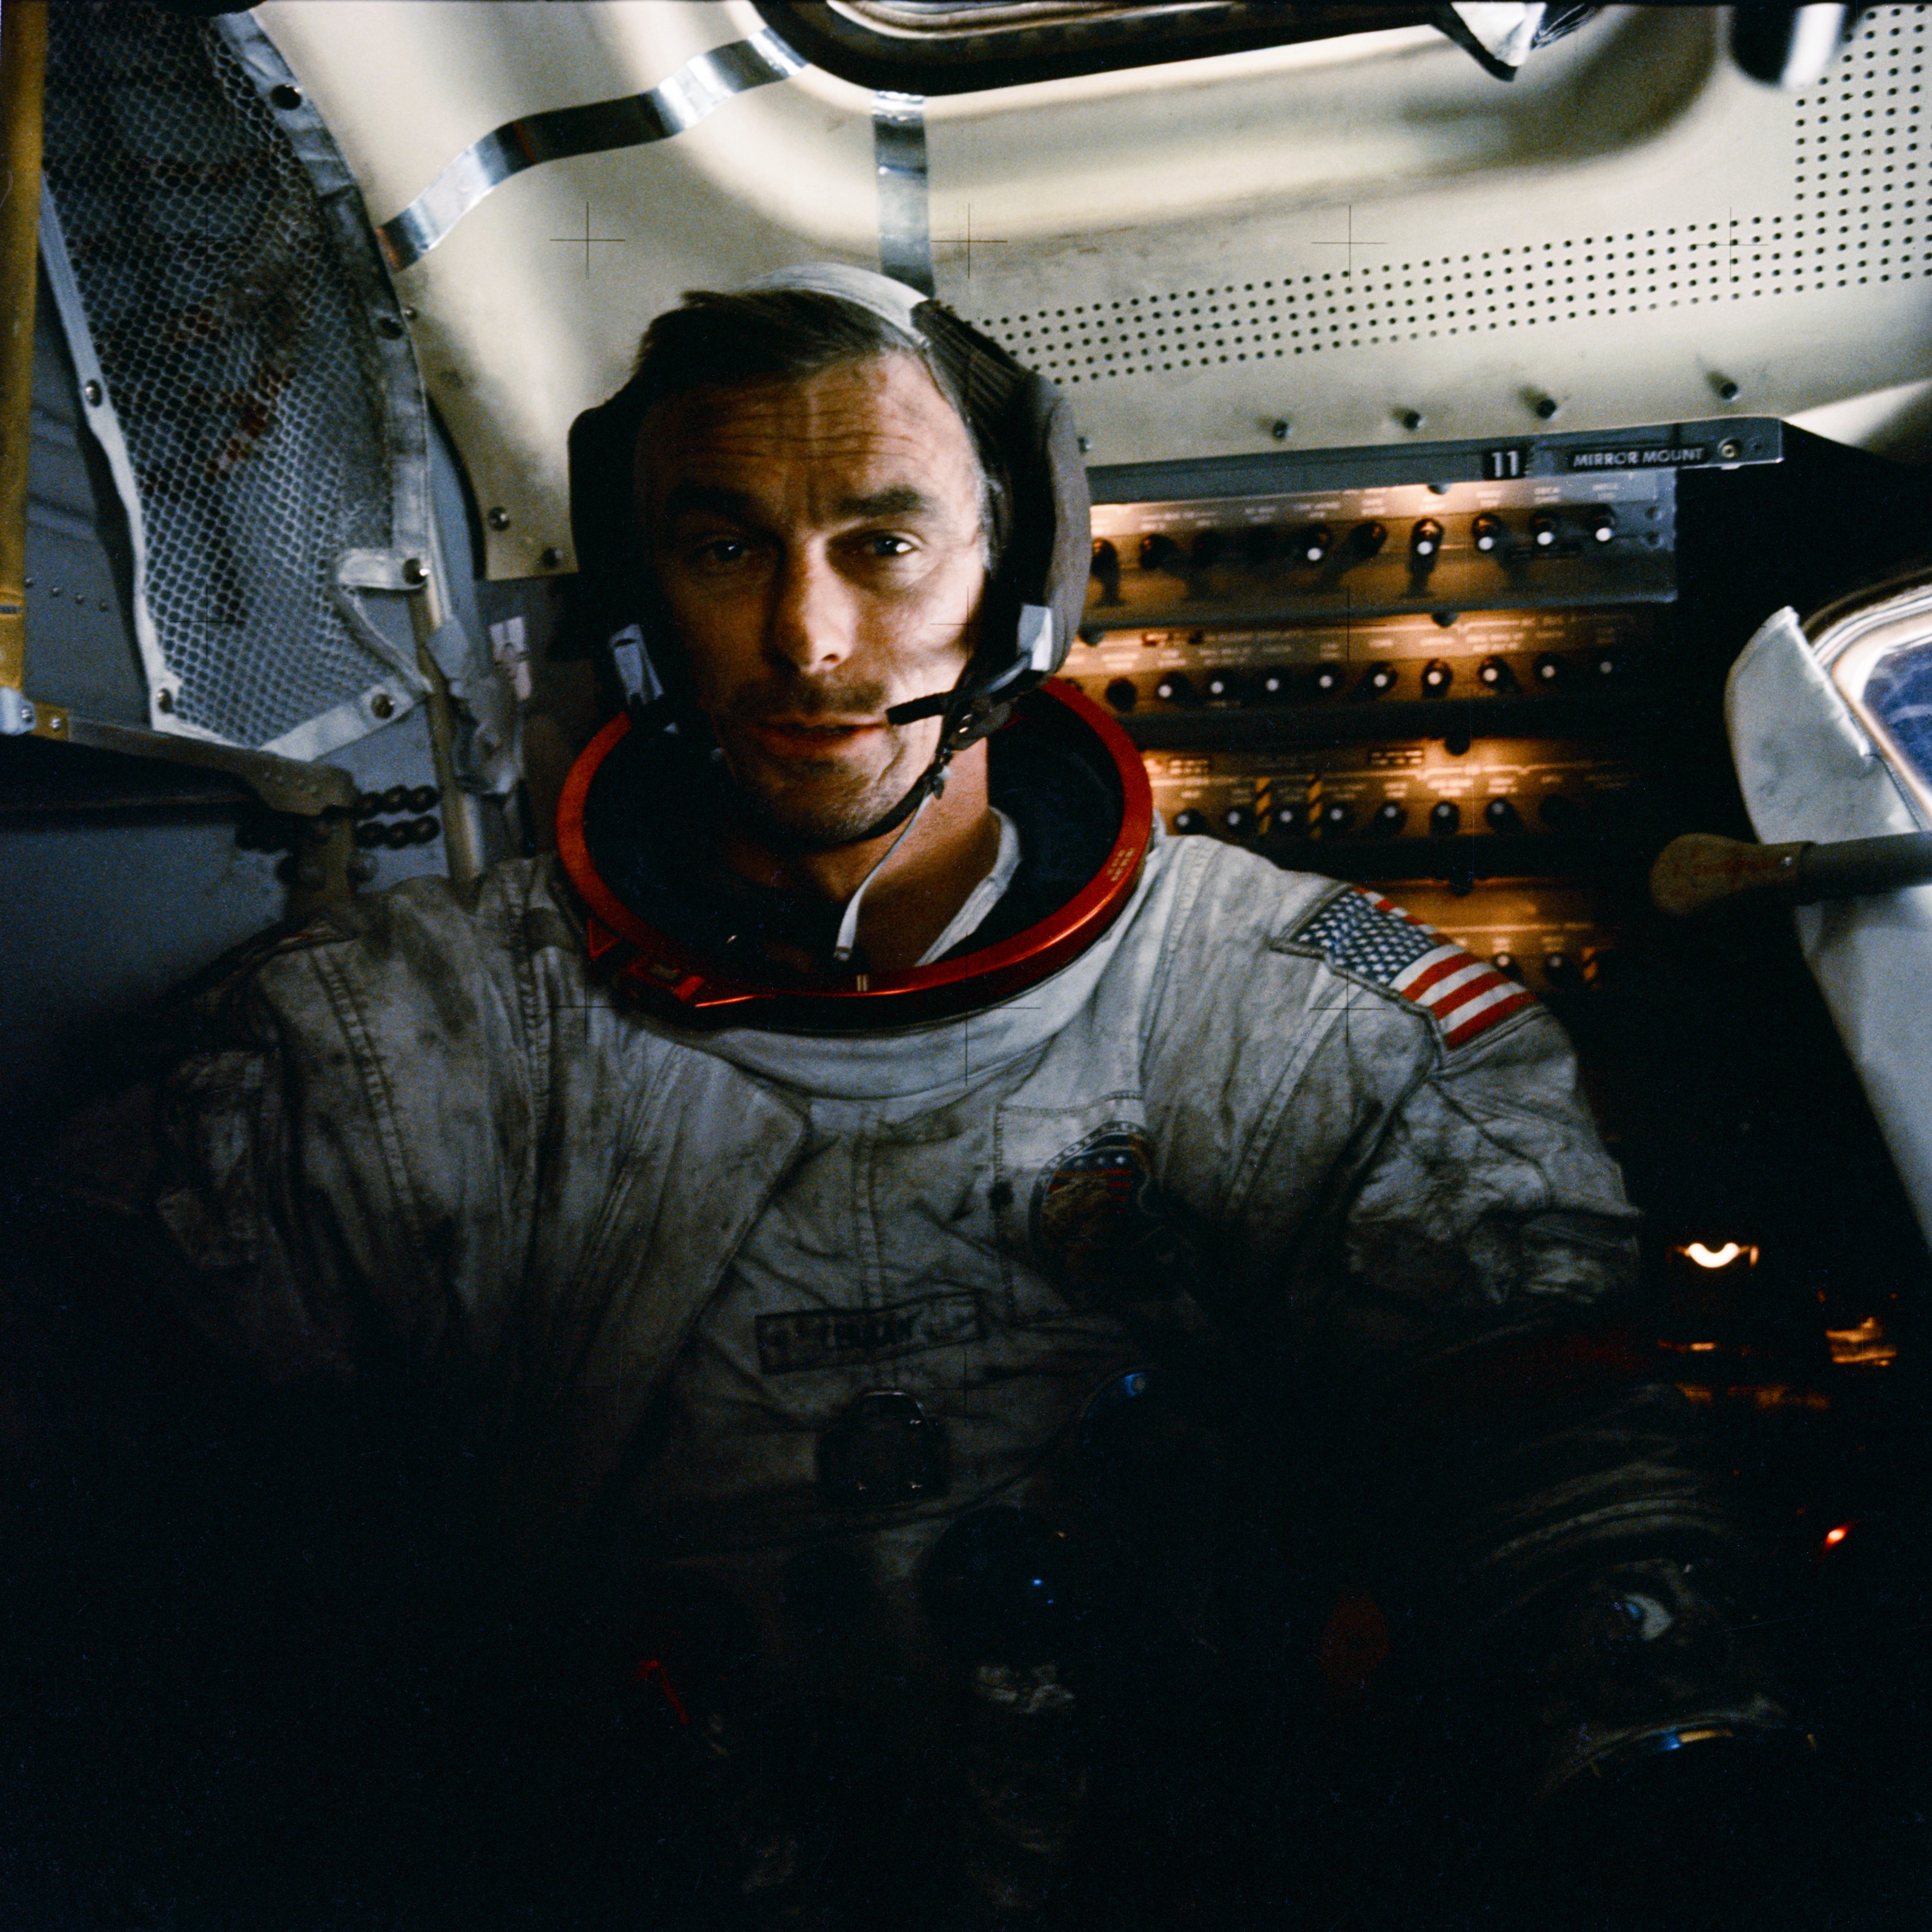 Apollo 17 mission commander Eugene Cernan inside the lunar module on the moon after his second moonwalk of the mission. His spacesuit is covered with lunar dust. Photo courtesy of NASA.